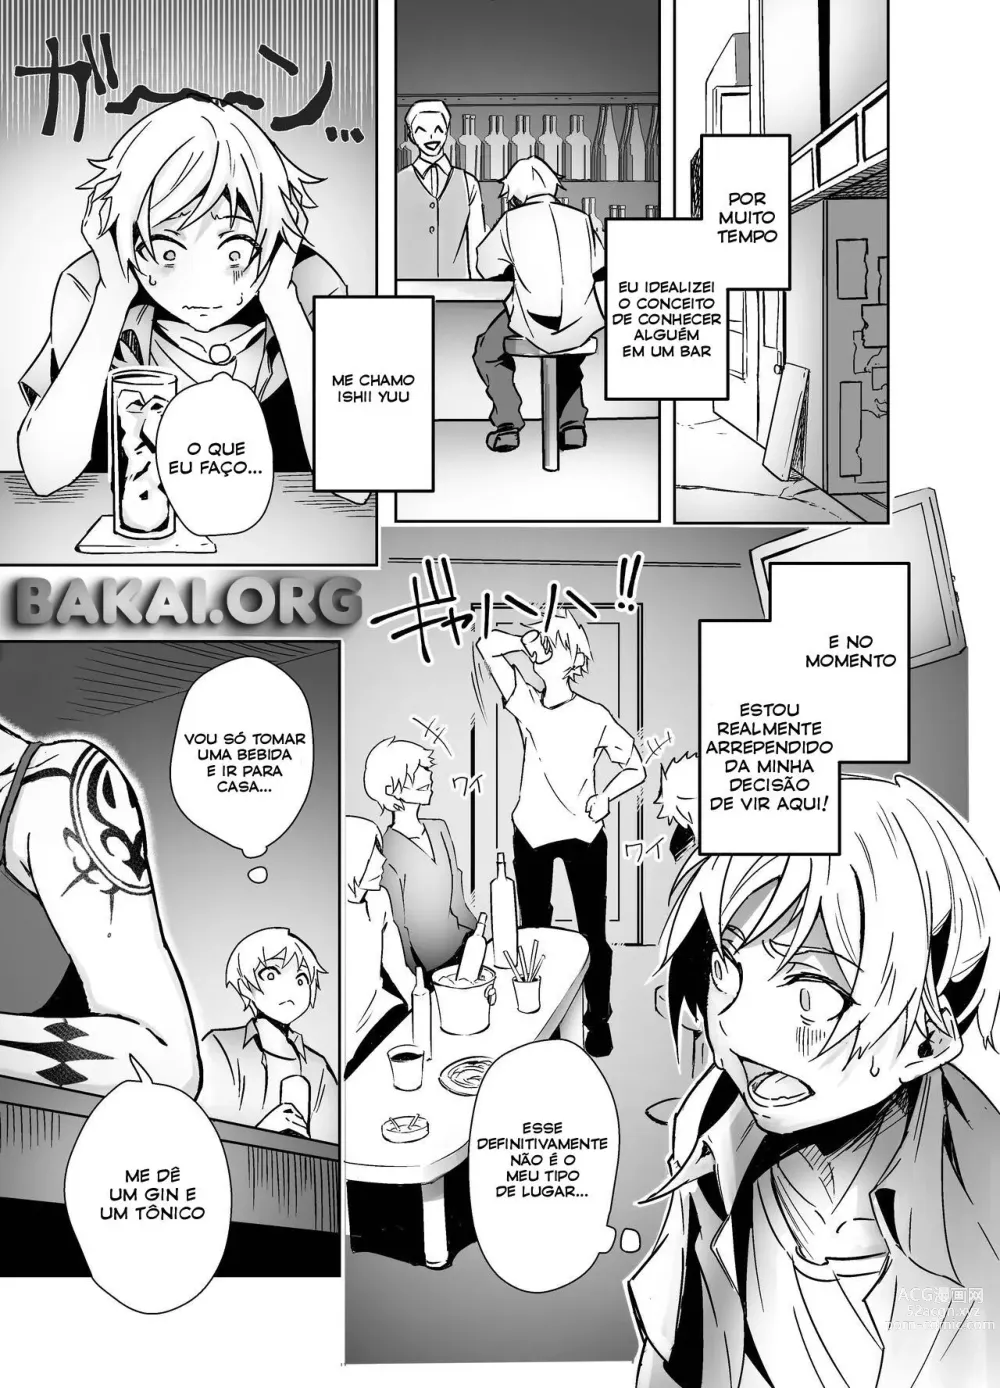 Page 2 of doujinshi The Perverted Love I Have With A Girl With Full-Body Tattoos That I Met At a Bar